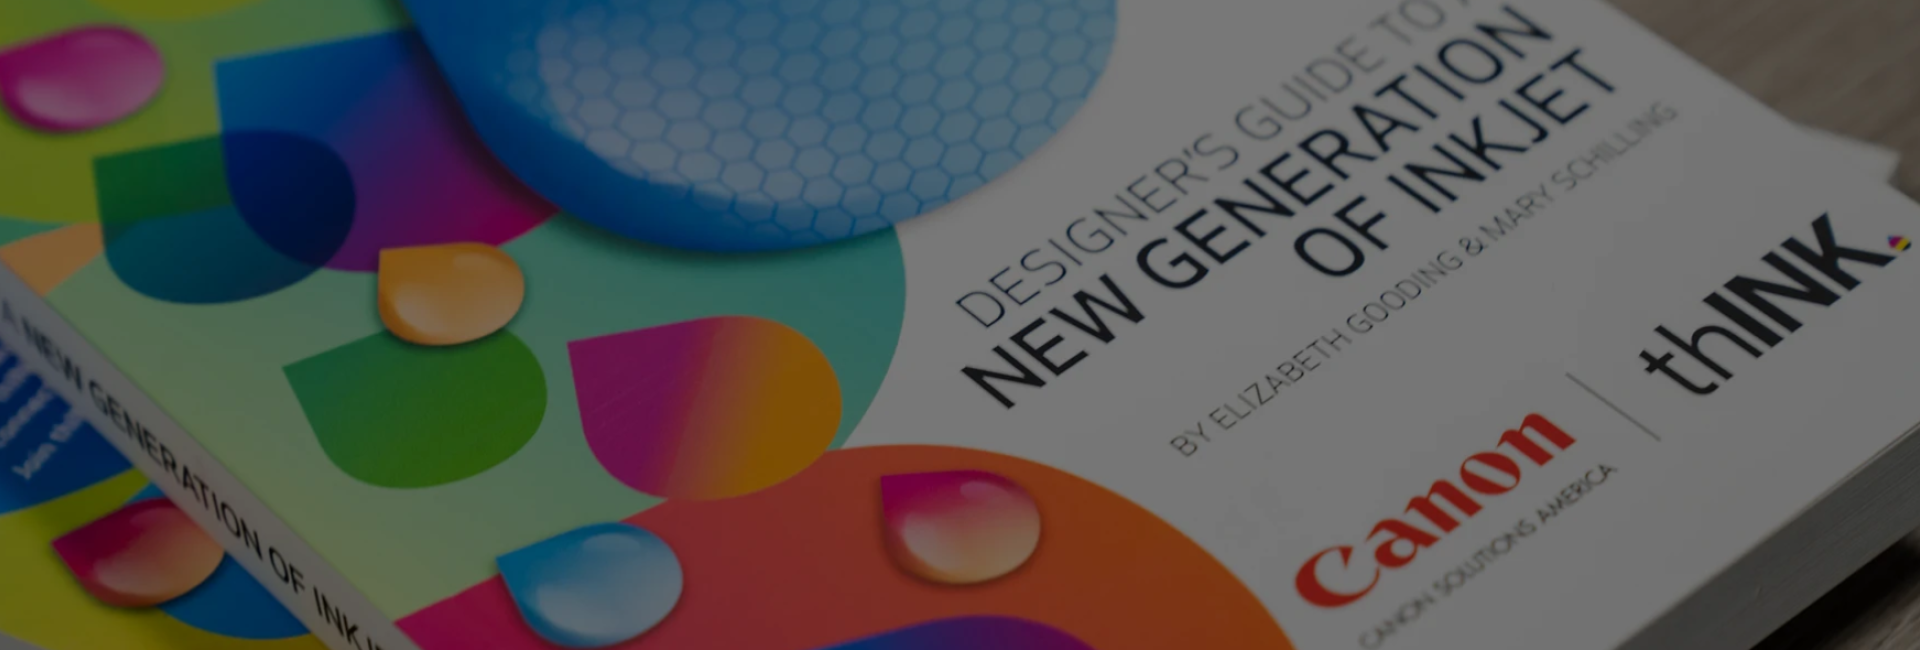 Designer's Guide to a New Generation Book Close Up